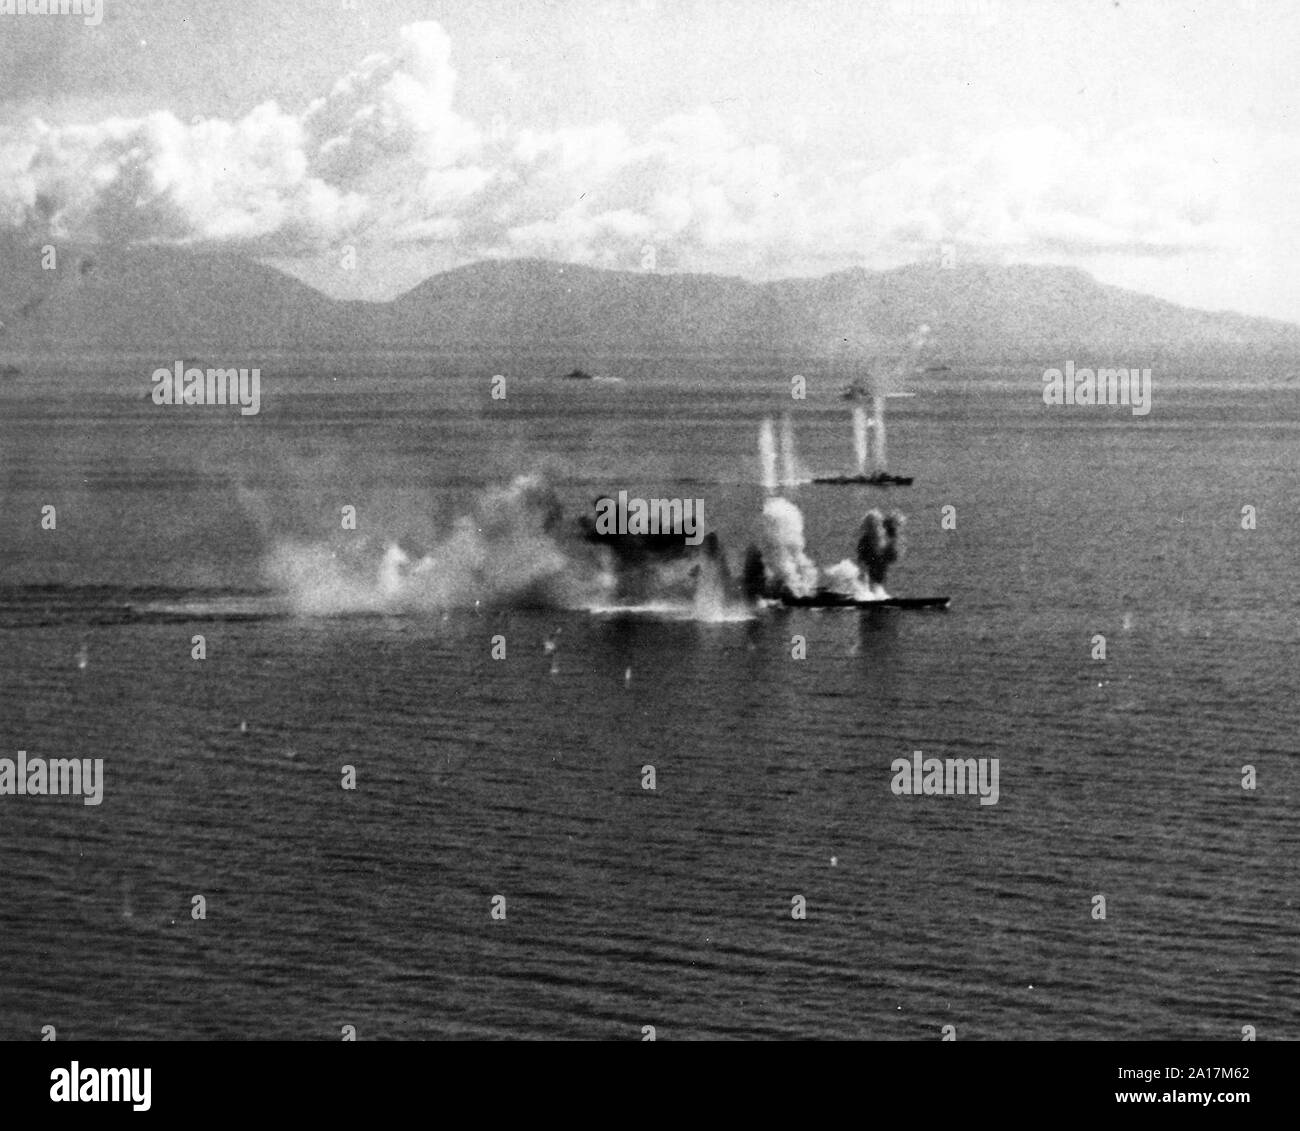 U.S. Navy Task Force 38 aircraft attack the Imperial Japanese Navy battleship Musashi (foreground) and a destroyer in the Sibuyan Sea, 24 October 1944. Stock Photo